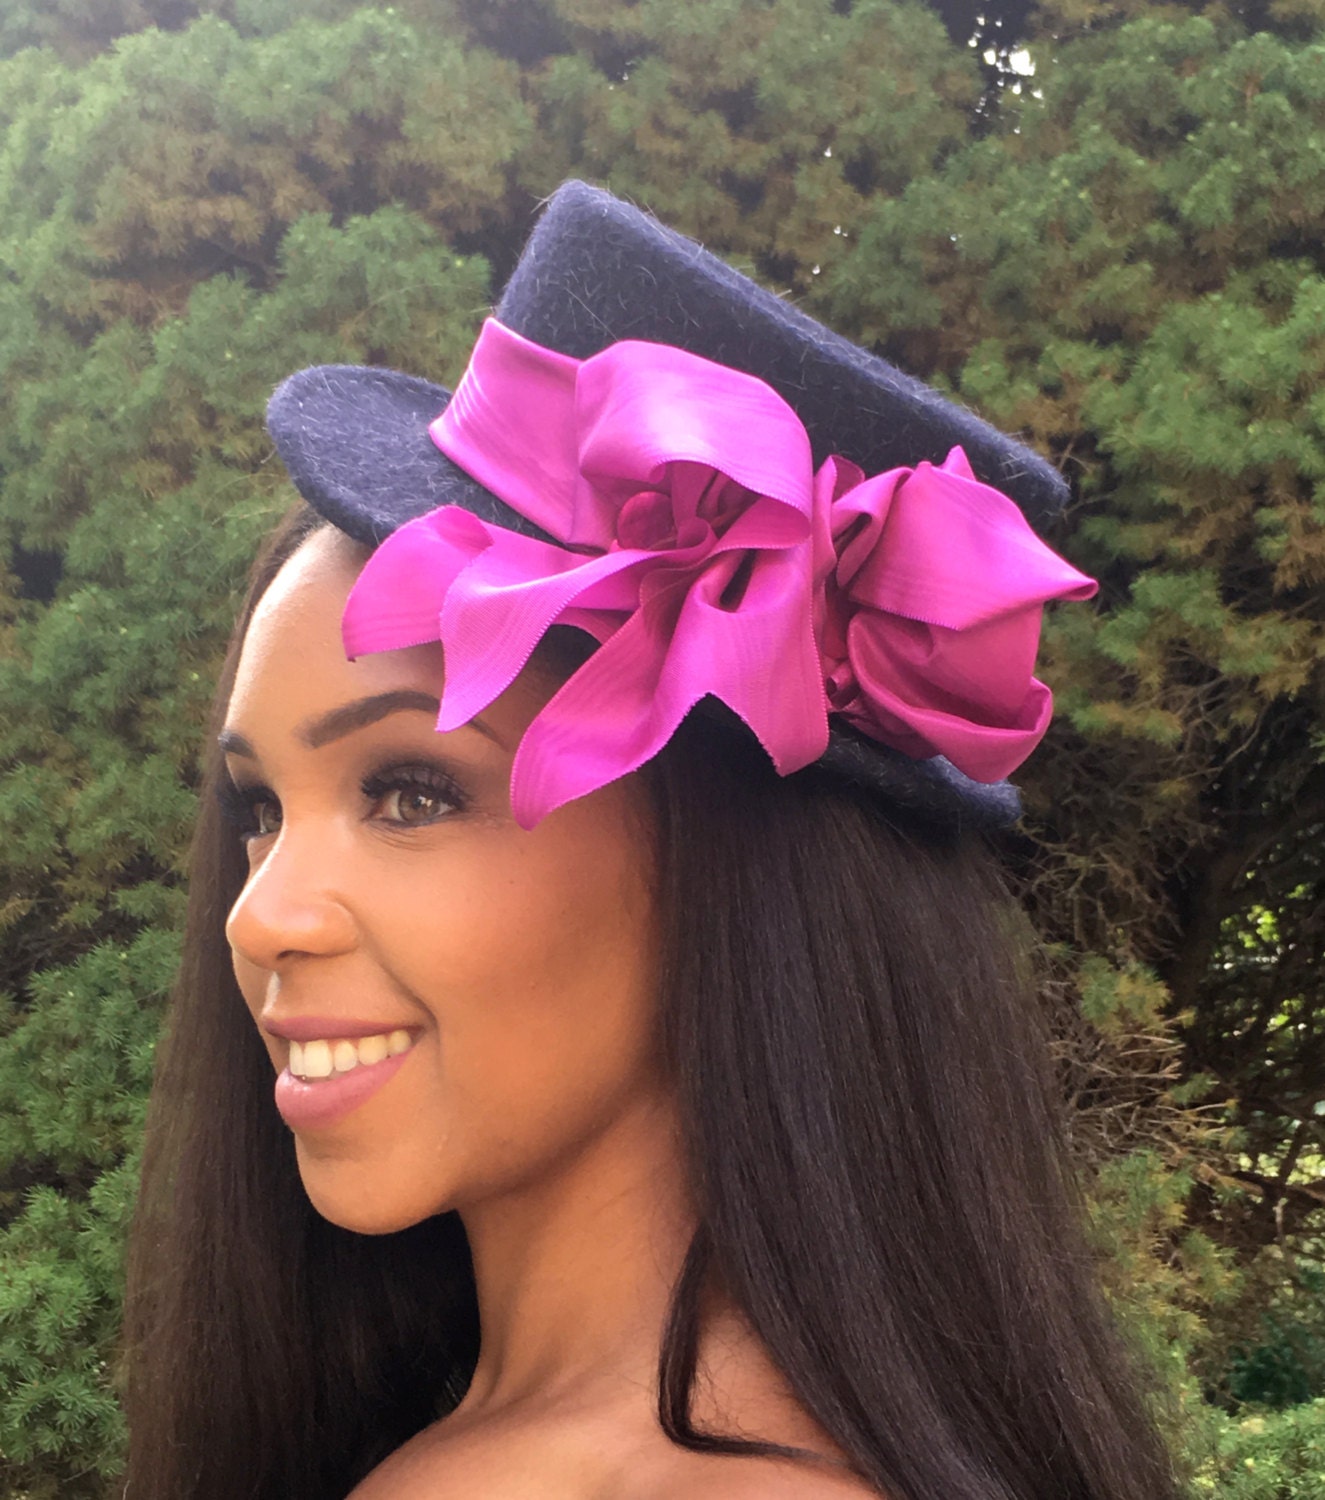 Navy Blue Mini Top Hat with Bright Orchid Pink Moire Ribbon-Jewel stone accents-Winter Races-Church-Polo Matches-Handmade Hat-Weddings-Party